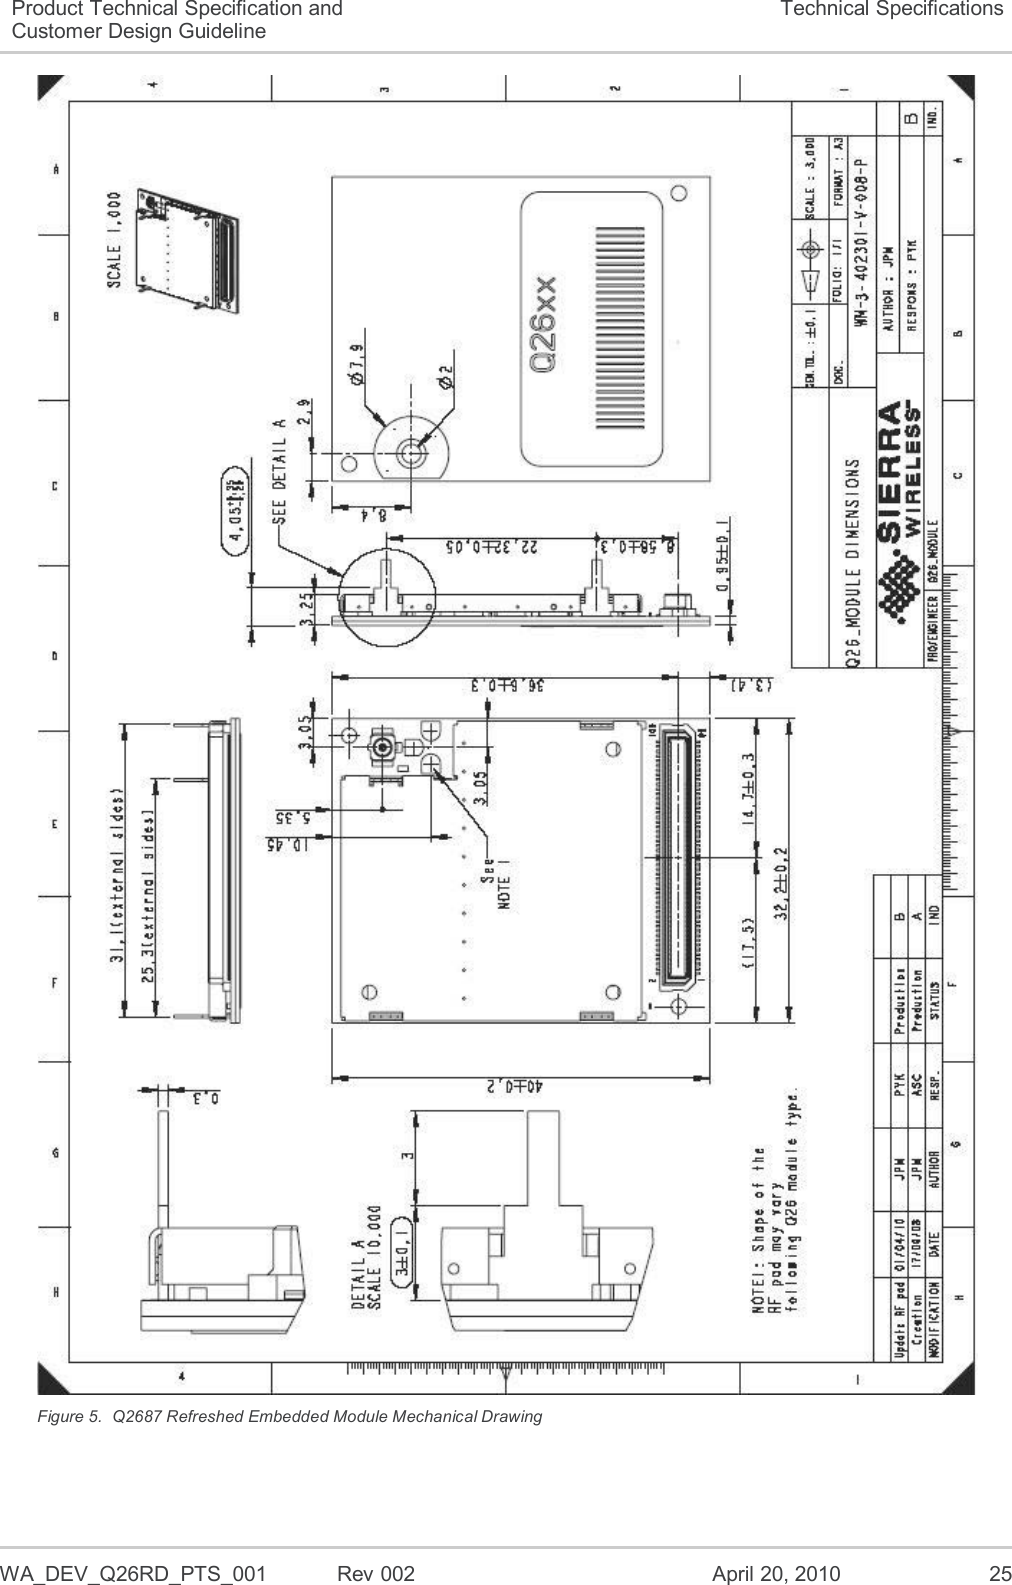  WA_DEV_Q26RD_PTS_001  Rev 002  April 20, 2010 25 Product Technical Specification and Customer Design Guideline Technical Specifications  Figure 5.  Q2687 Refreshed Embedded Module Mechanical Drawing 